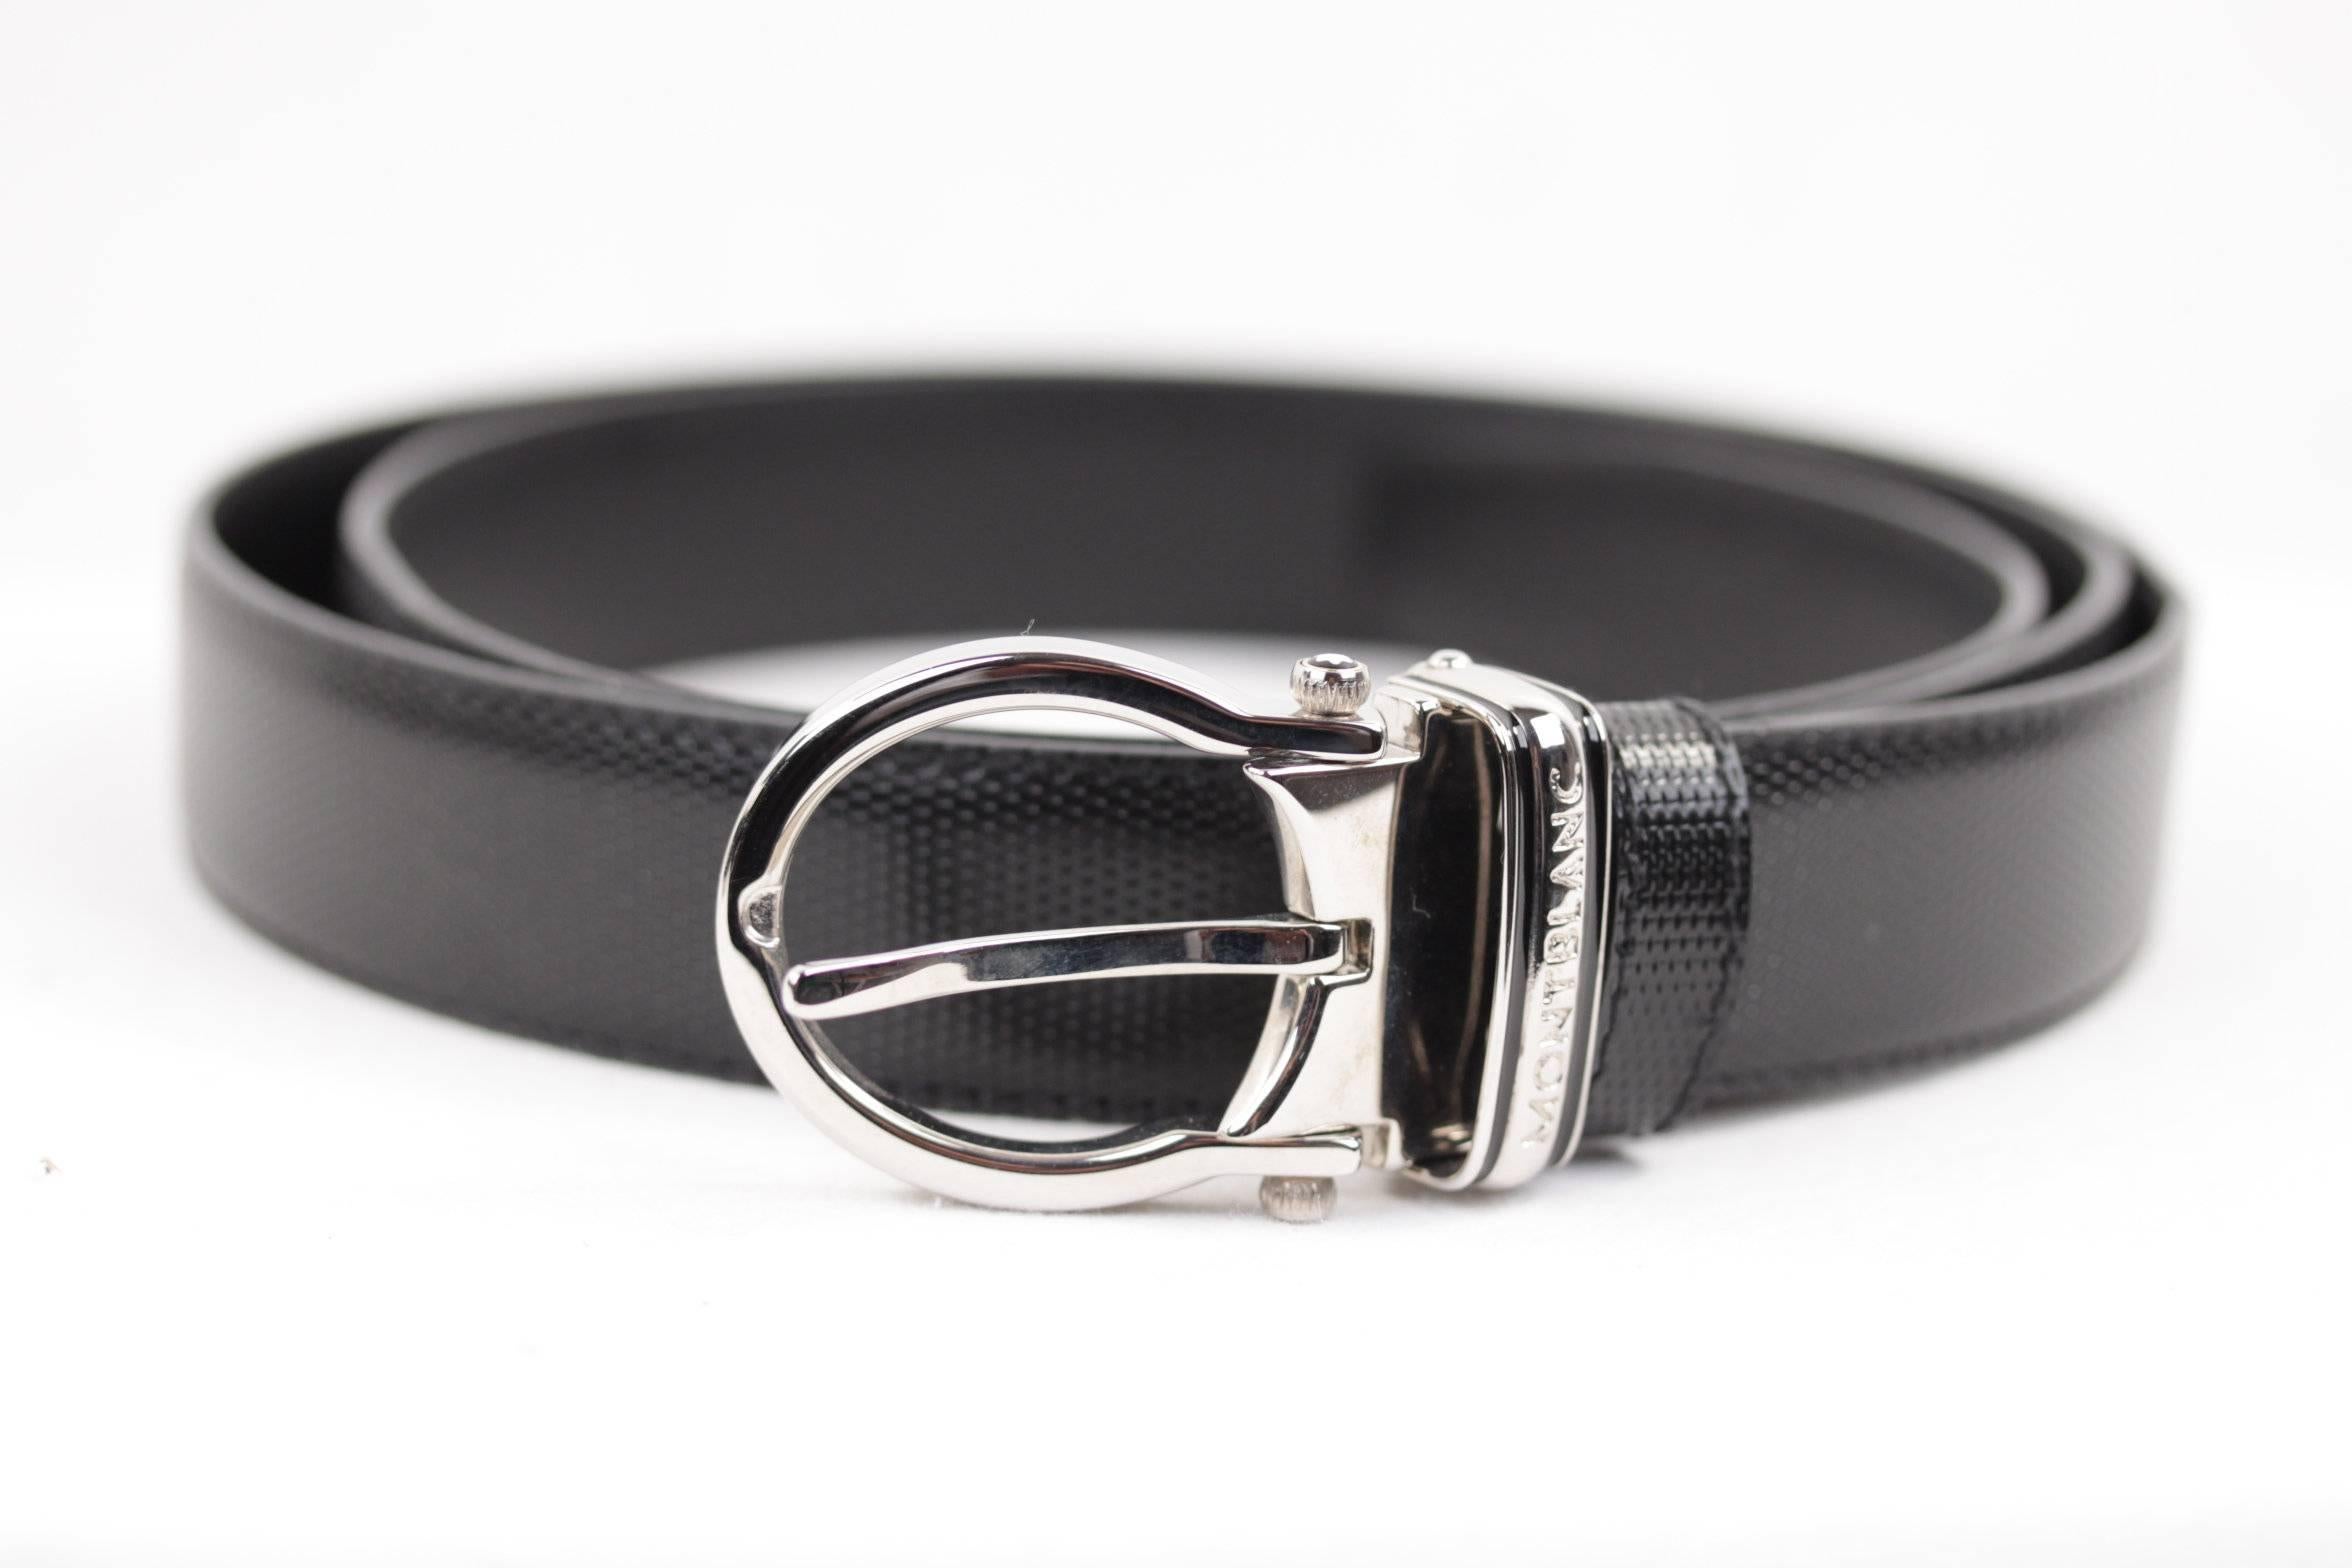  - Black genuine leather
- Silver metal oval shaped Buckle
- Single prong closure
- 7-hole adjustment
- 1 /4 inches - 3,2 cm wide
- Approx. total lenght (buckle included): 50 1/4 inches - 127,6 cm
Comes with its original MONTBLANC box, dustbag